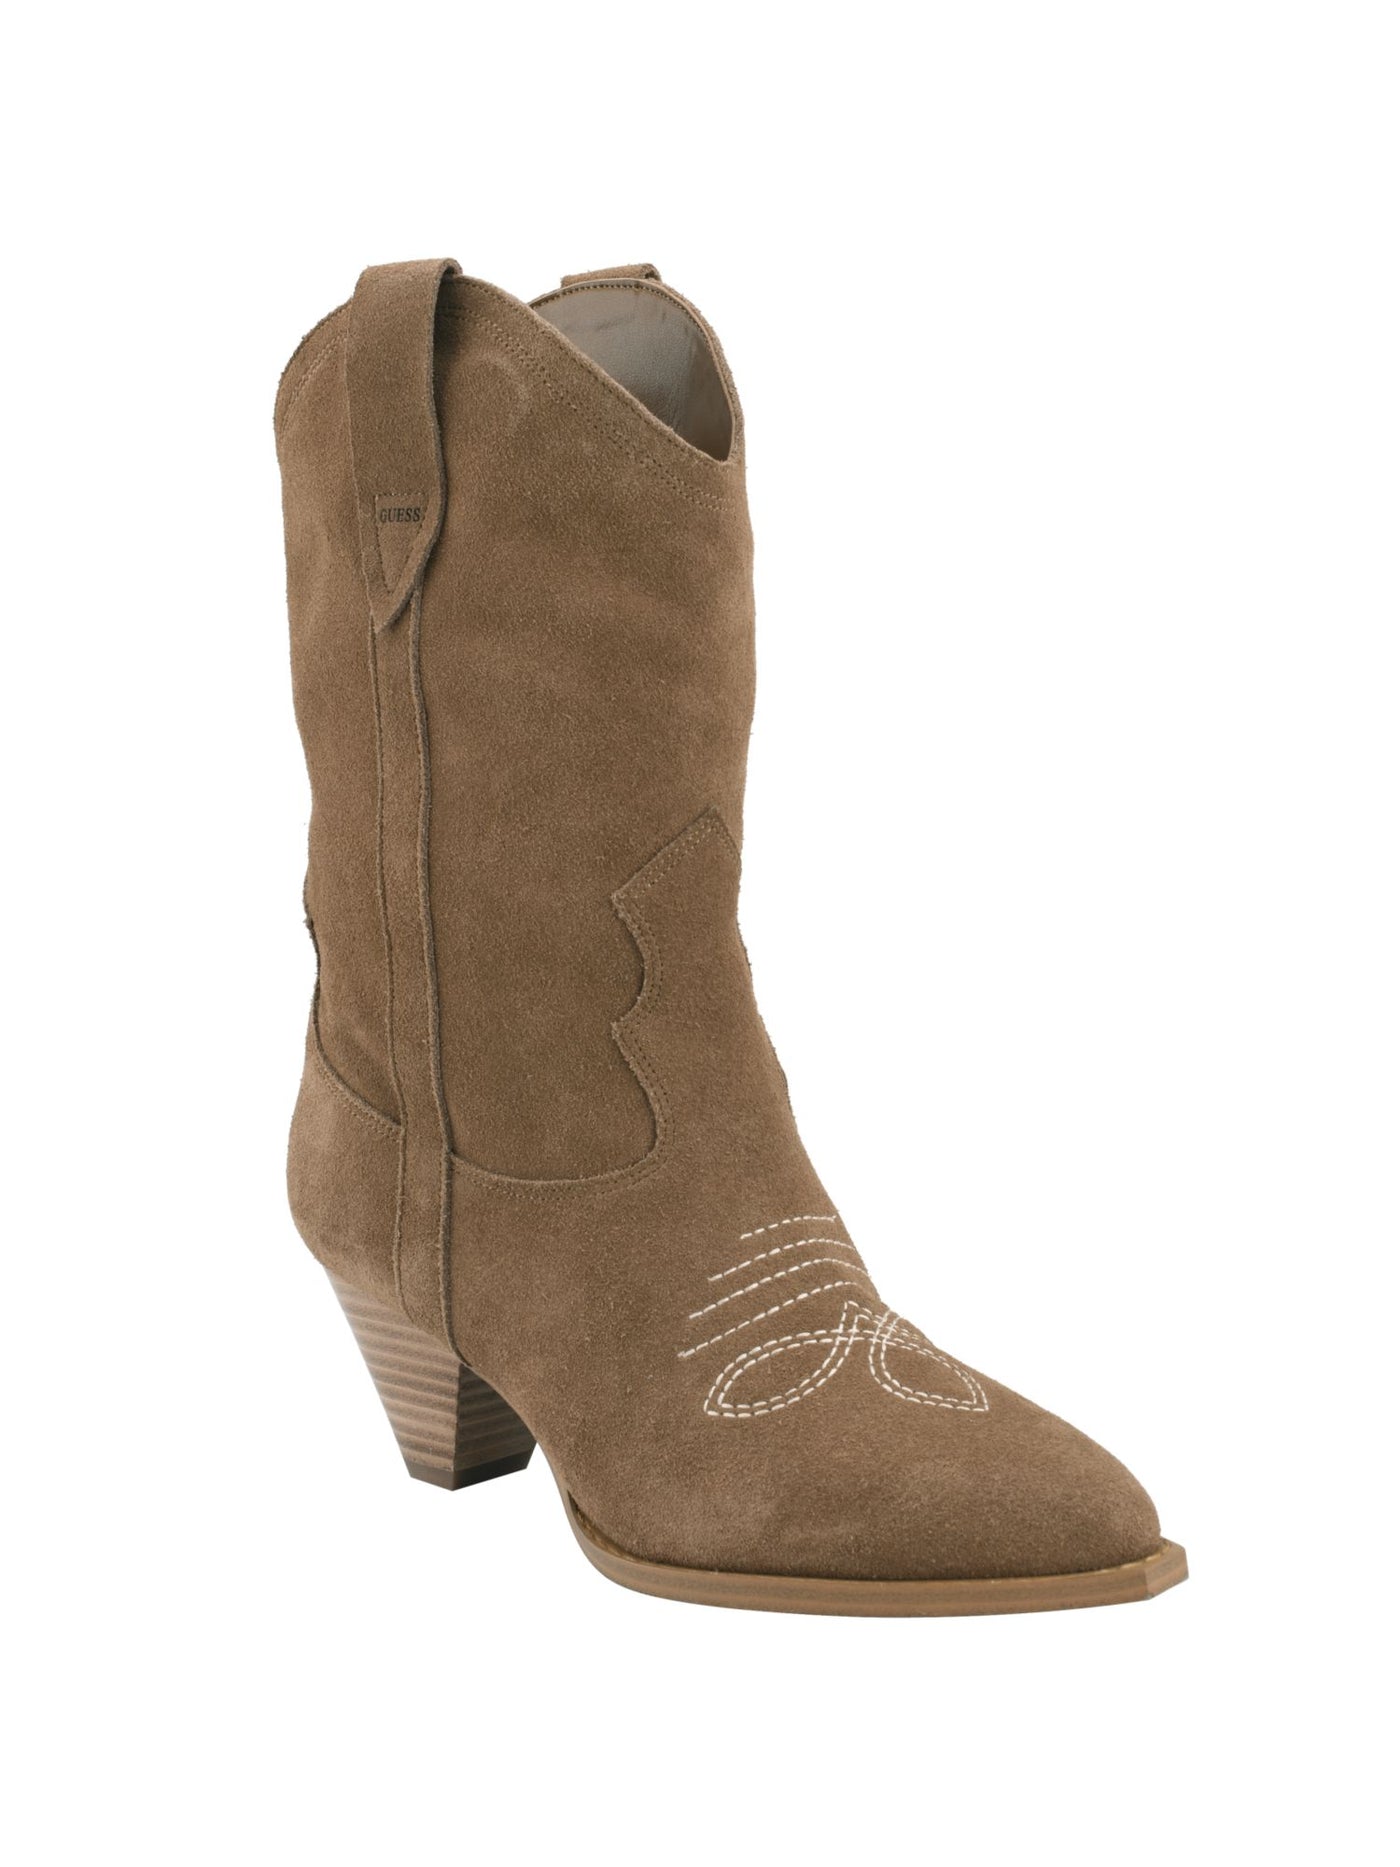 GUESS Womens Beige Padded Odilia Round Toe Cone Heel Leather Western Boot 7.5 M